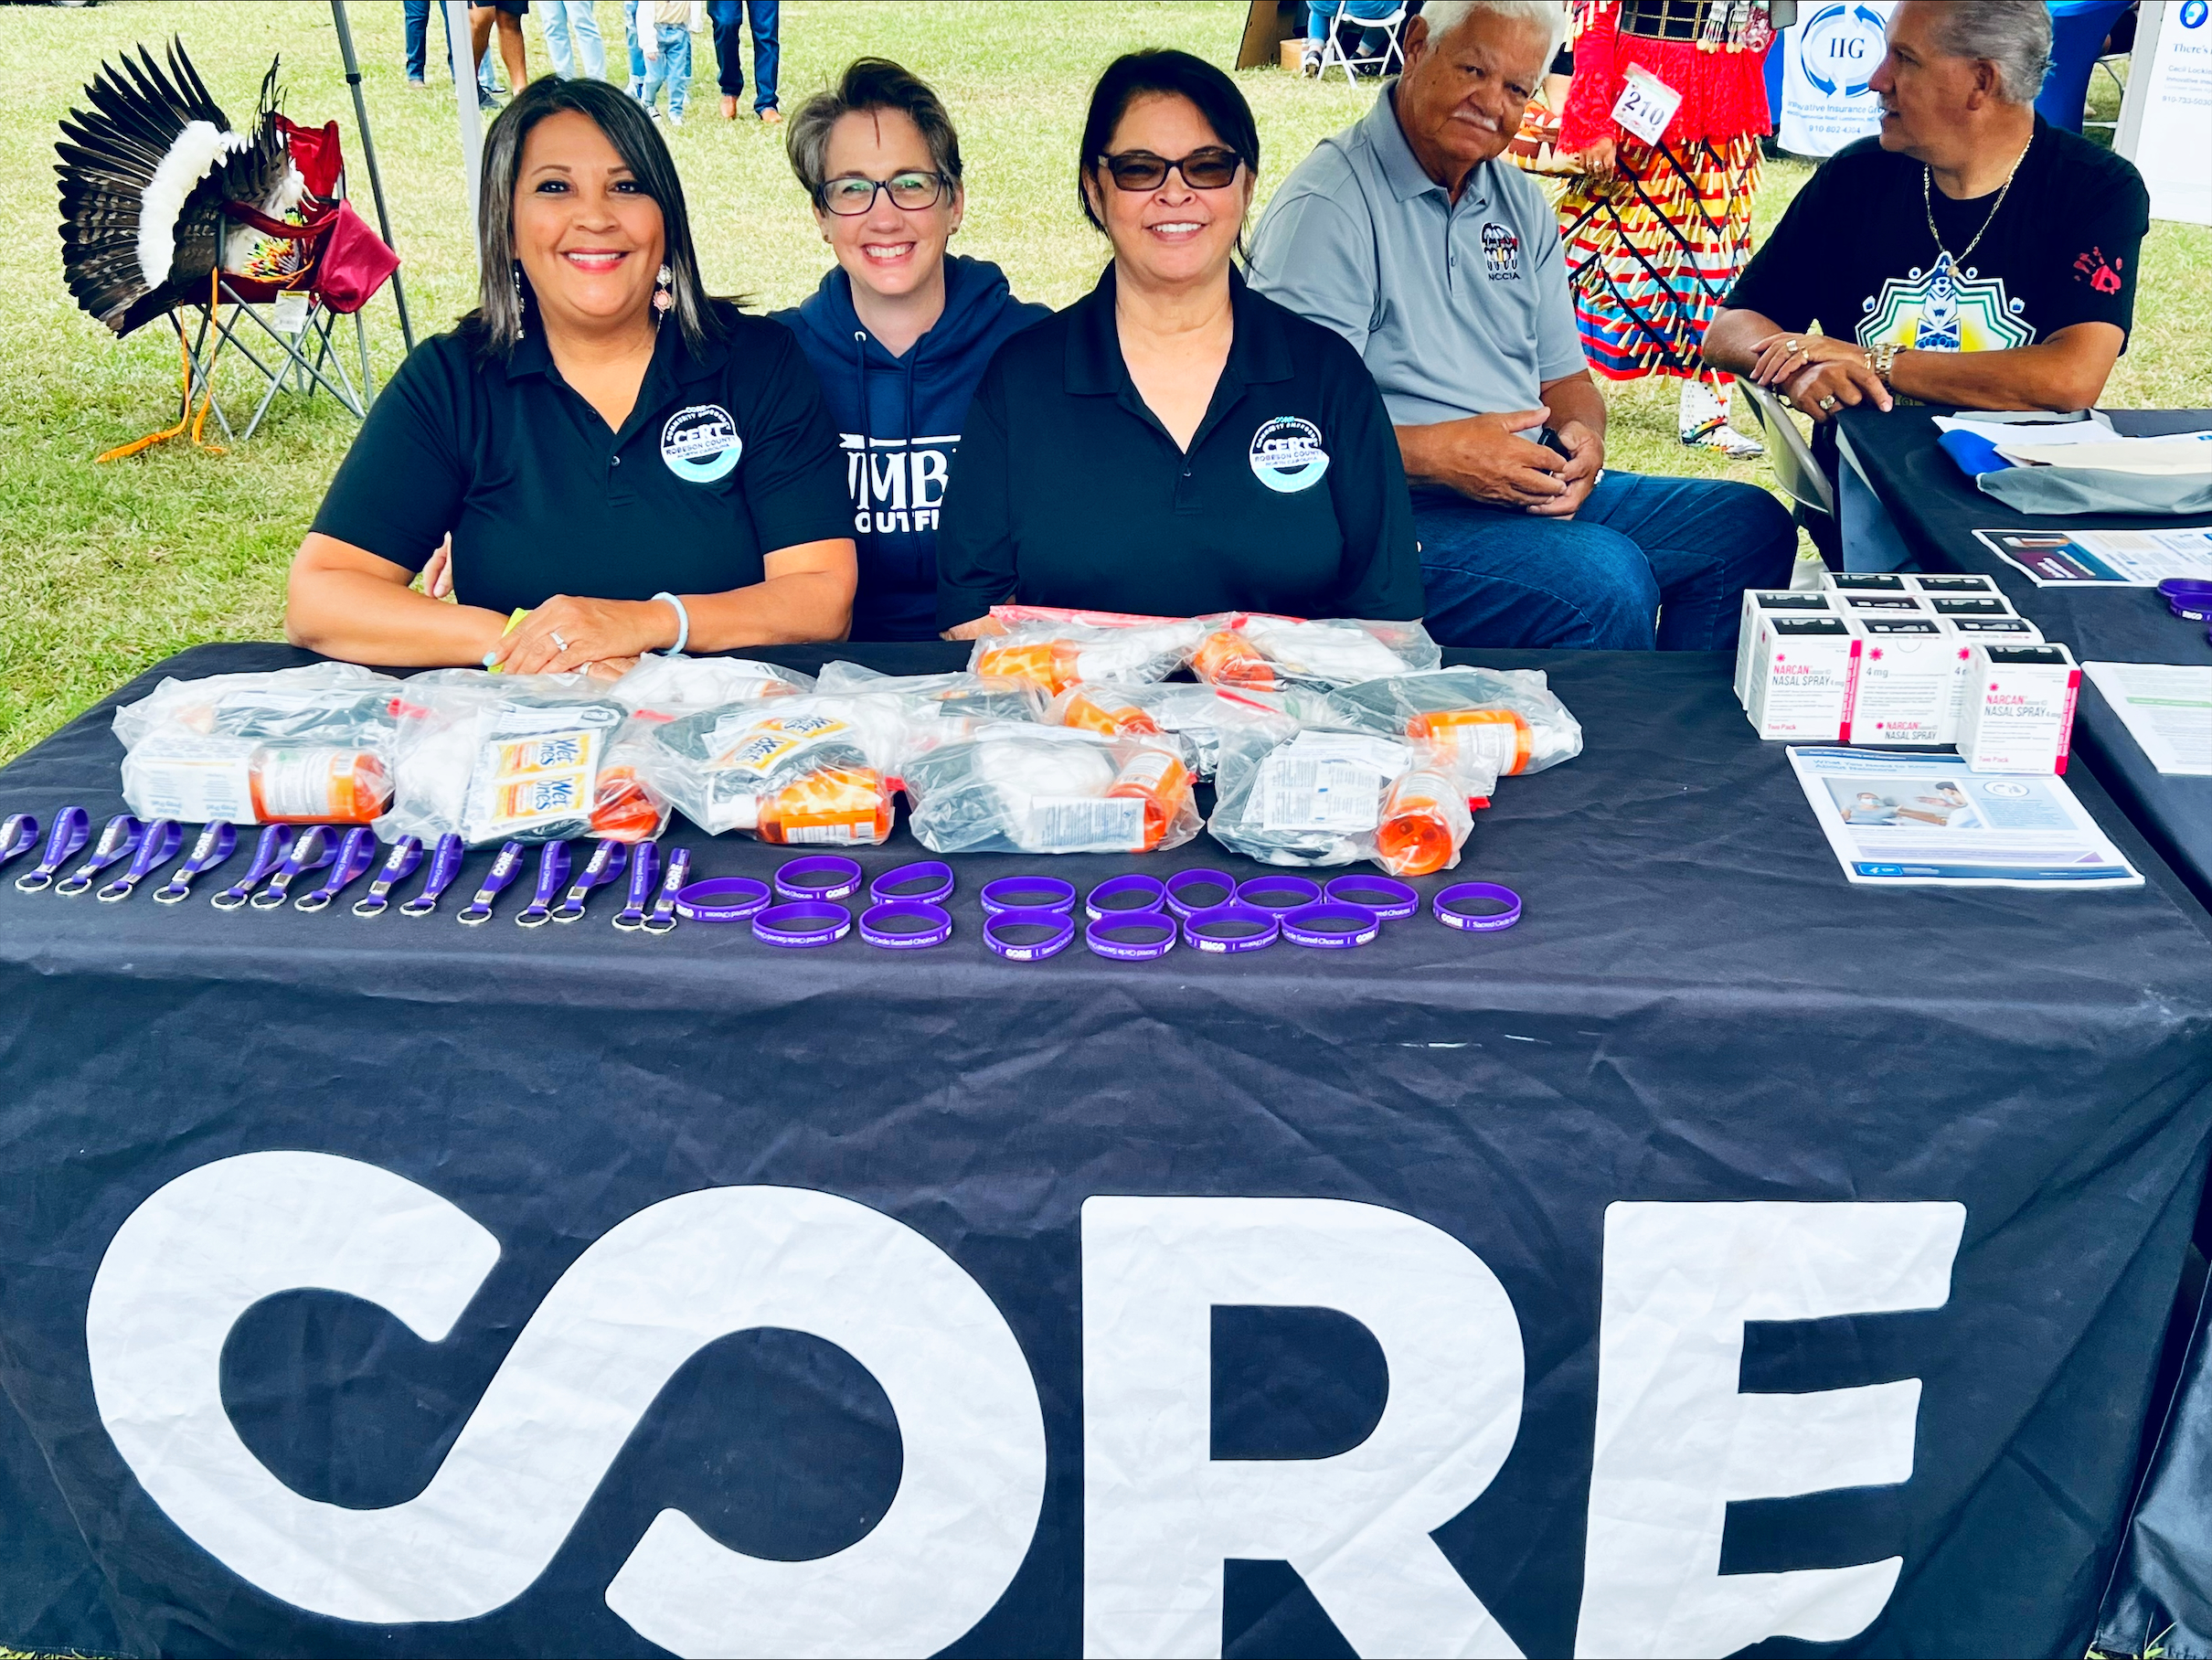 Linda Oxendine, Robyn Jordan and other team members at a community event.